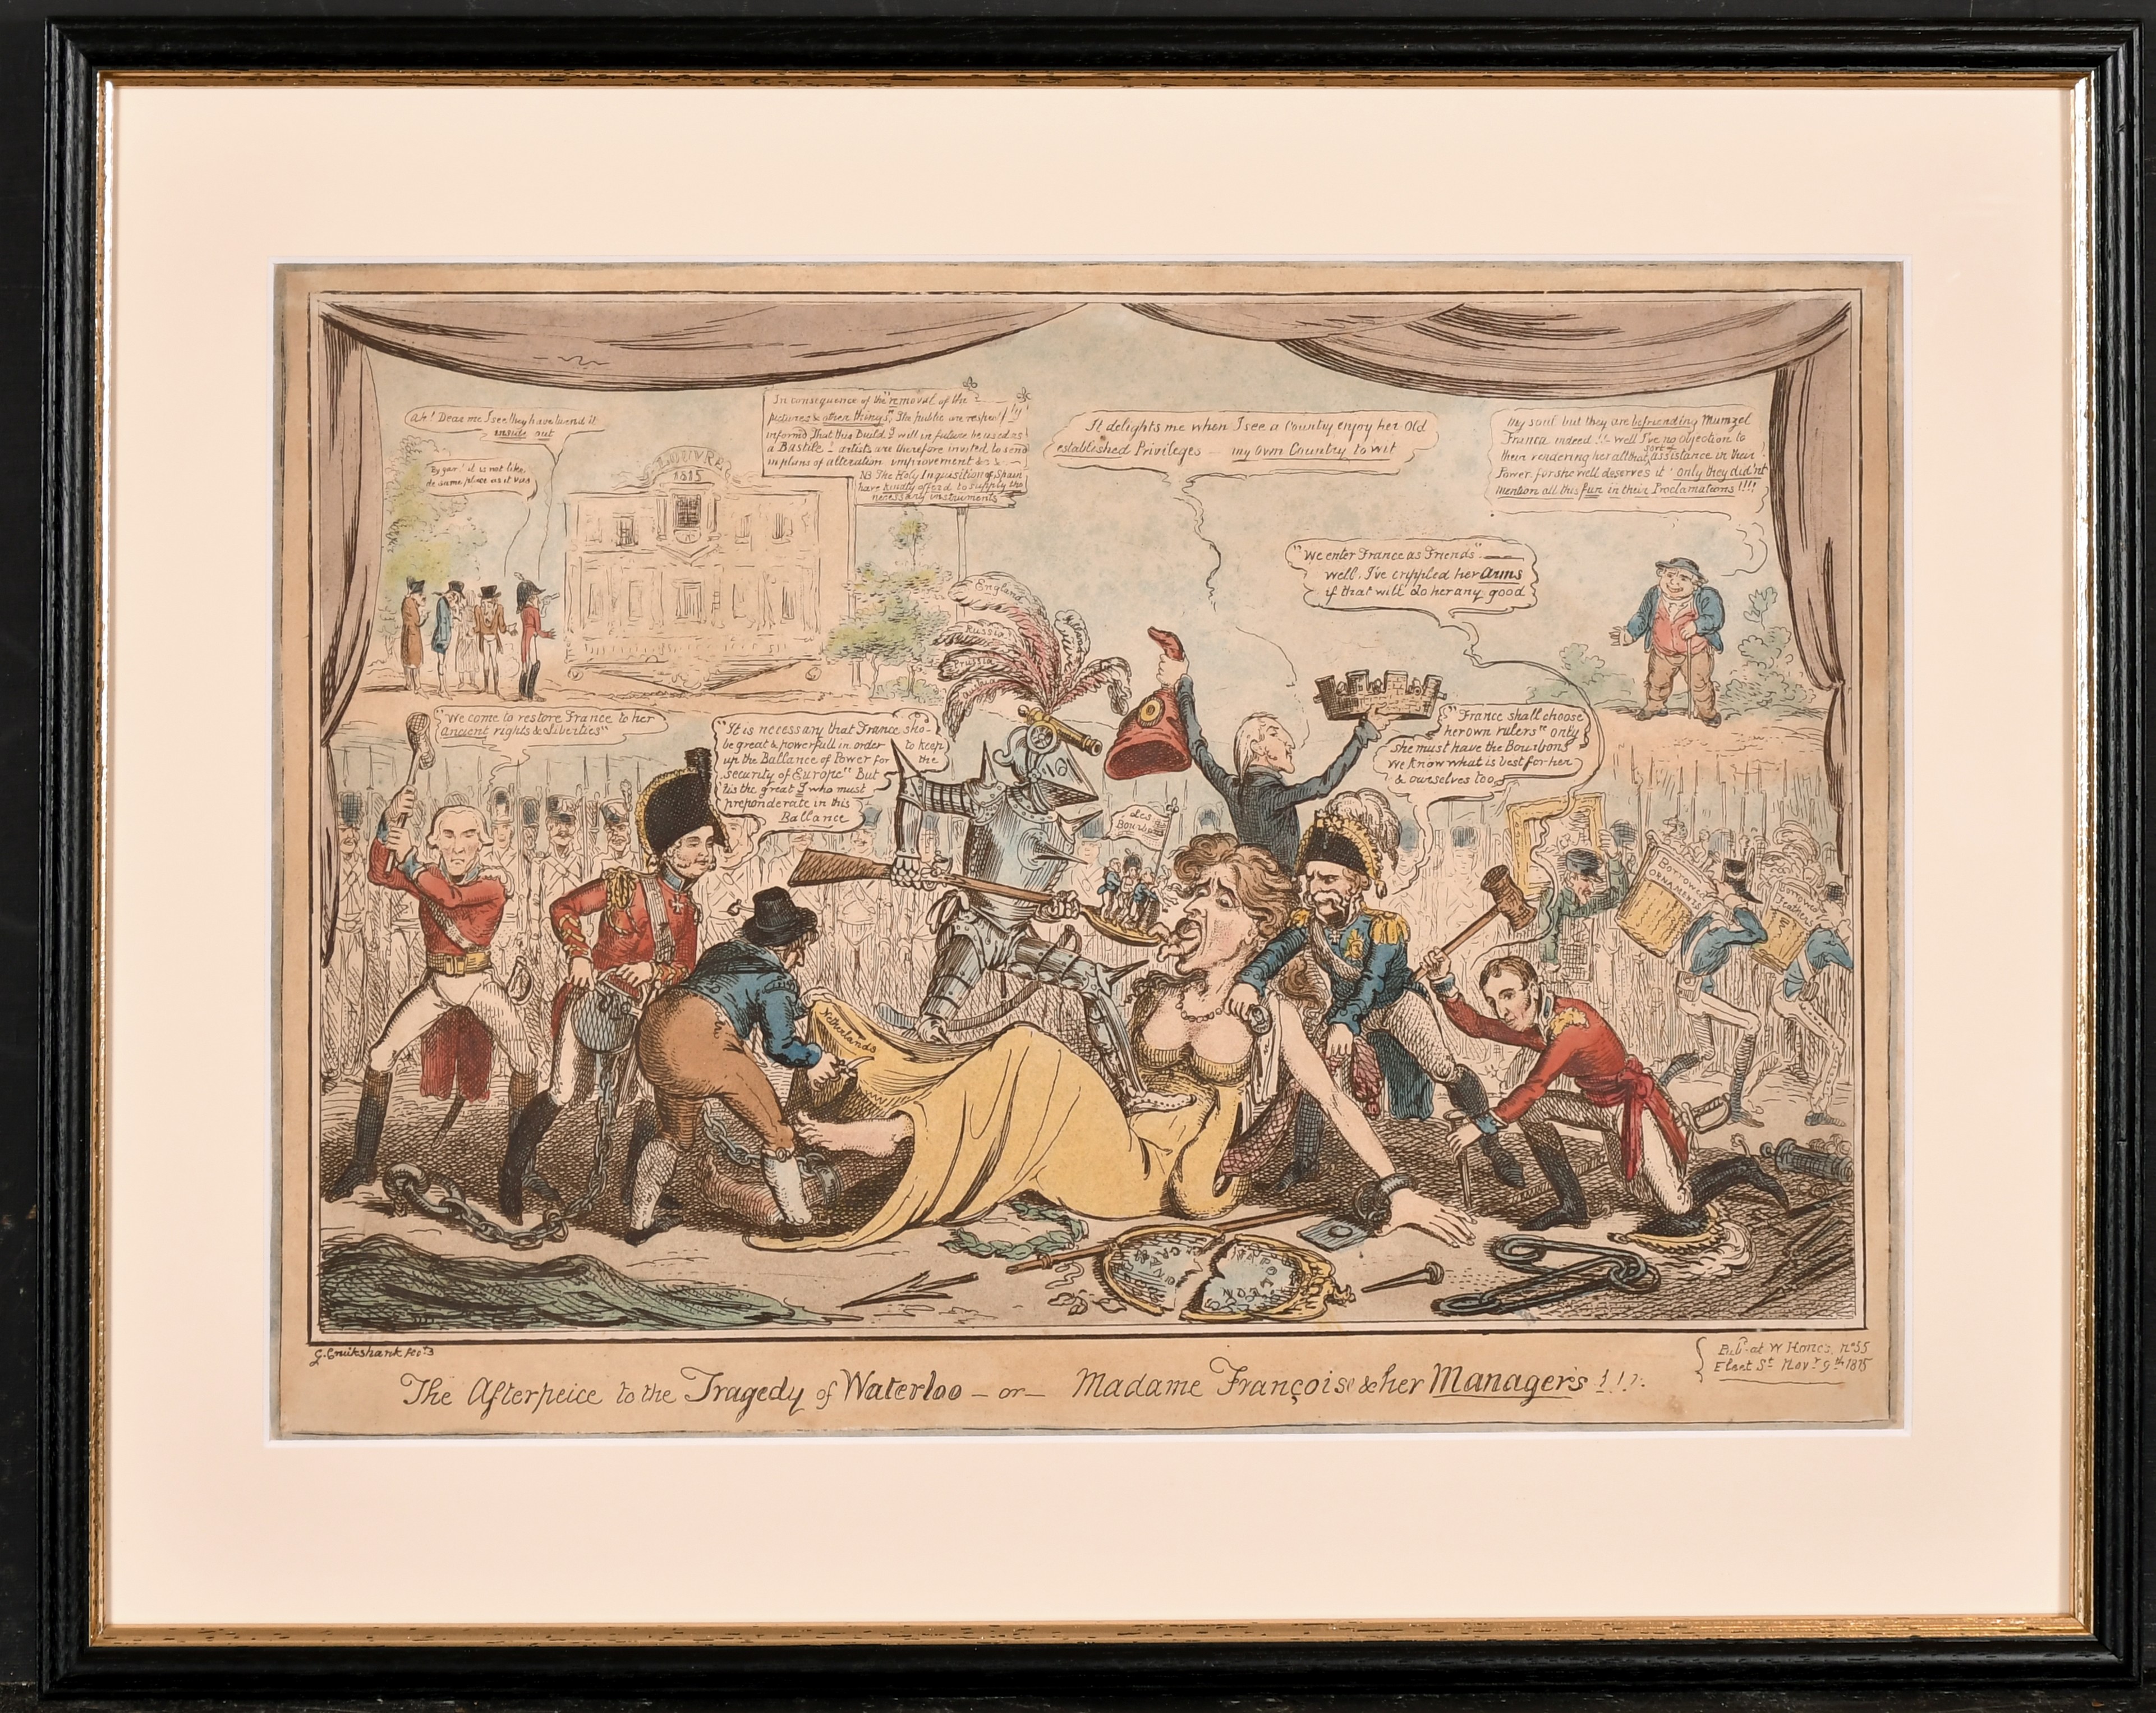 George Cruickshank (1792-1878) British. "The Afterpiece to the Tragedy of Waterloo - or - Madam - Image 2 of 7